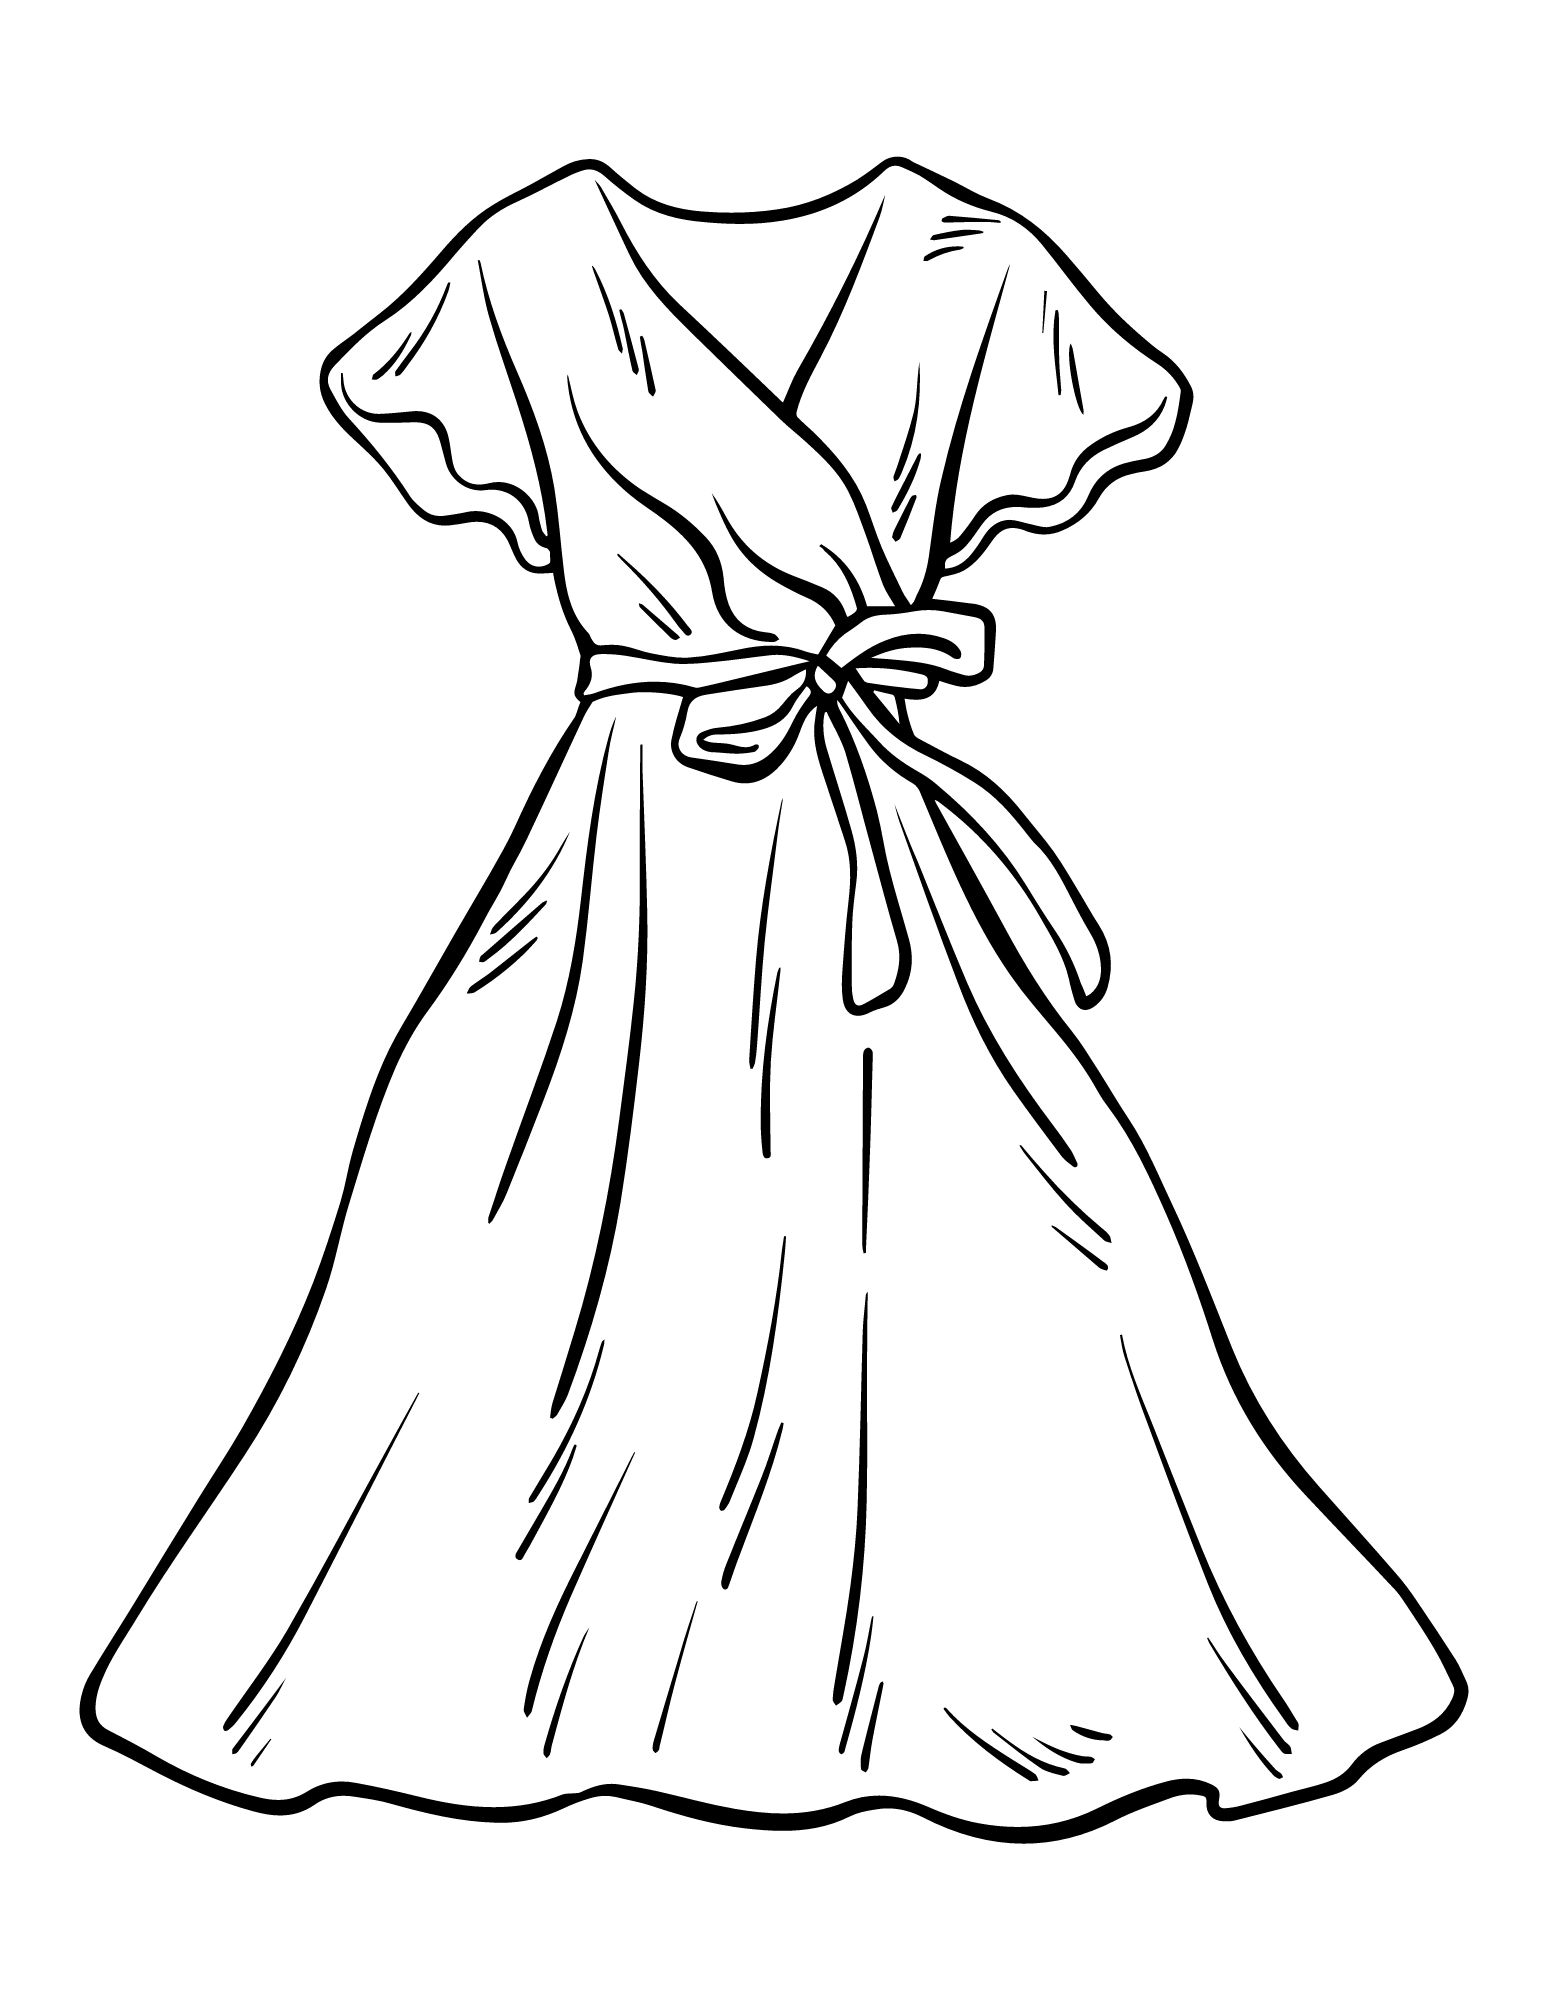 Dress Coloring Pages: 48 Amazing Dress Coloring Pages for Kids and Adults